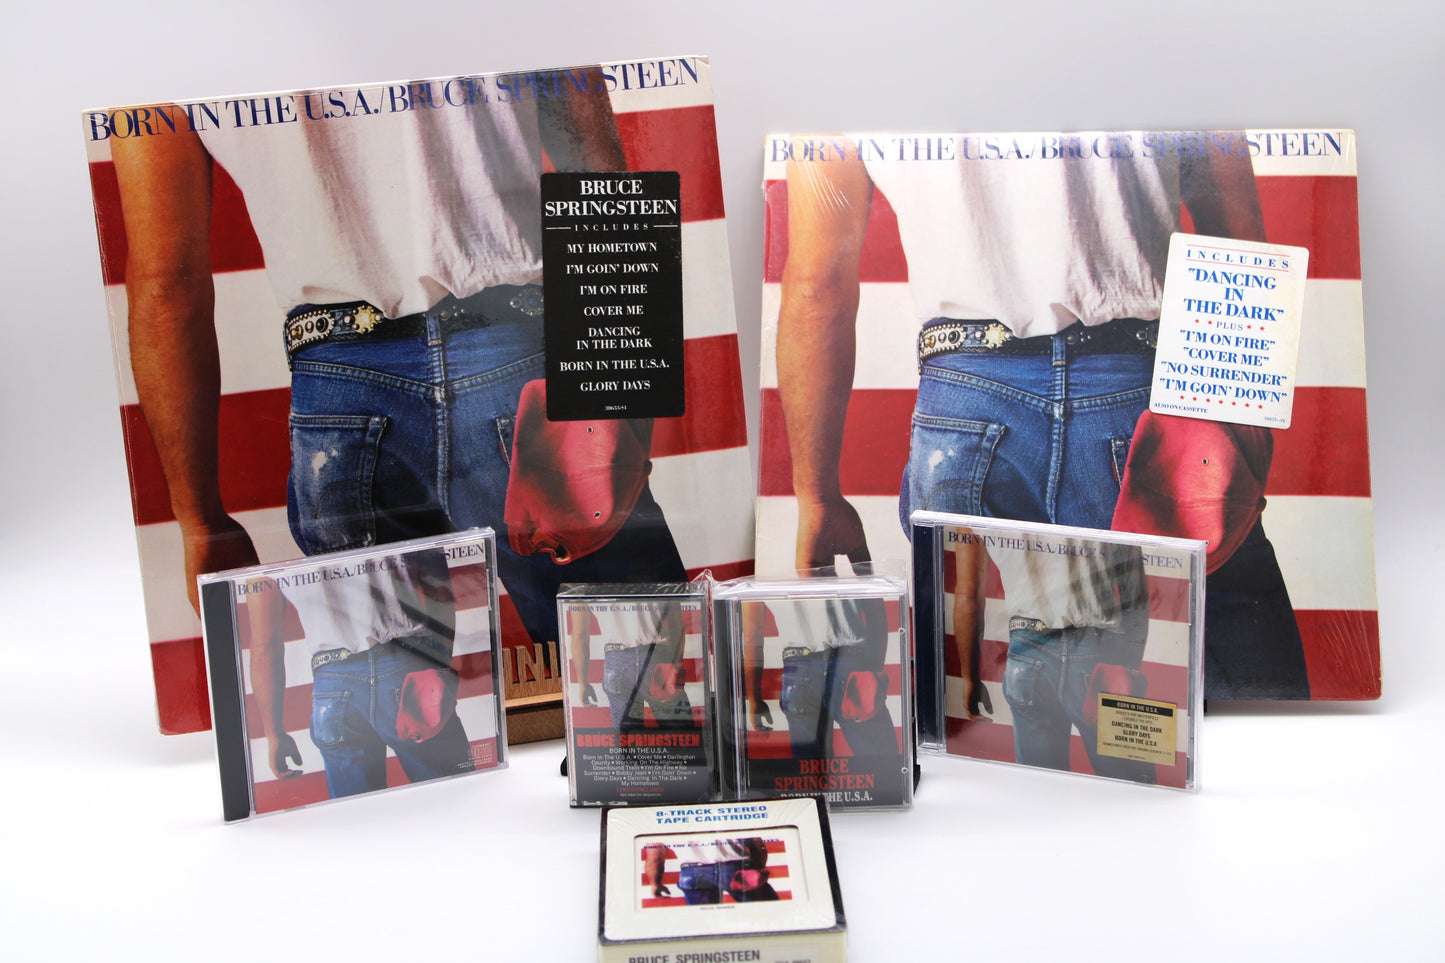 Bruce Springsteen SEALED Born In The USA - 7 Original Releases 1984 - Sealed as New - Multiple Formats Vinyl, 8 Track, Cassette, MD, CD